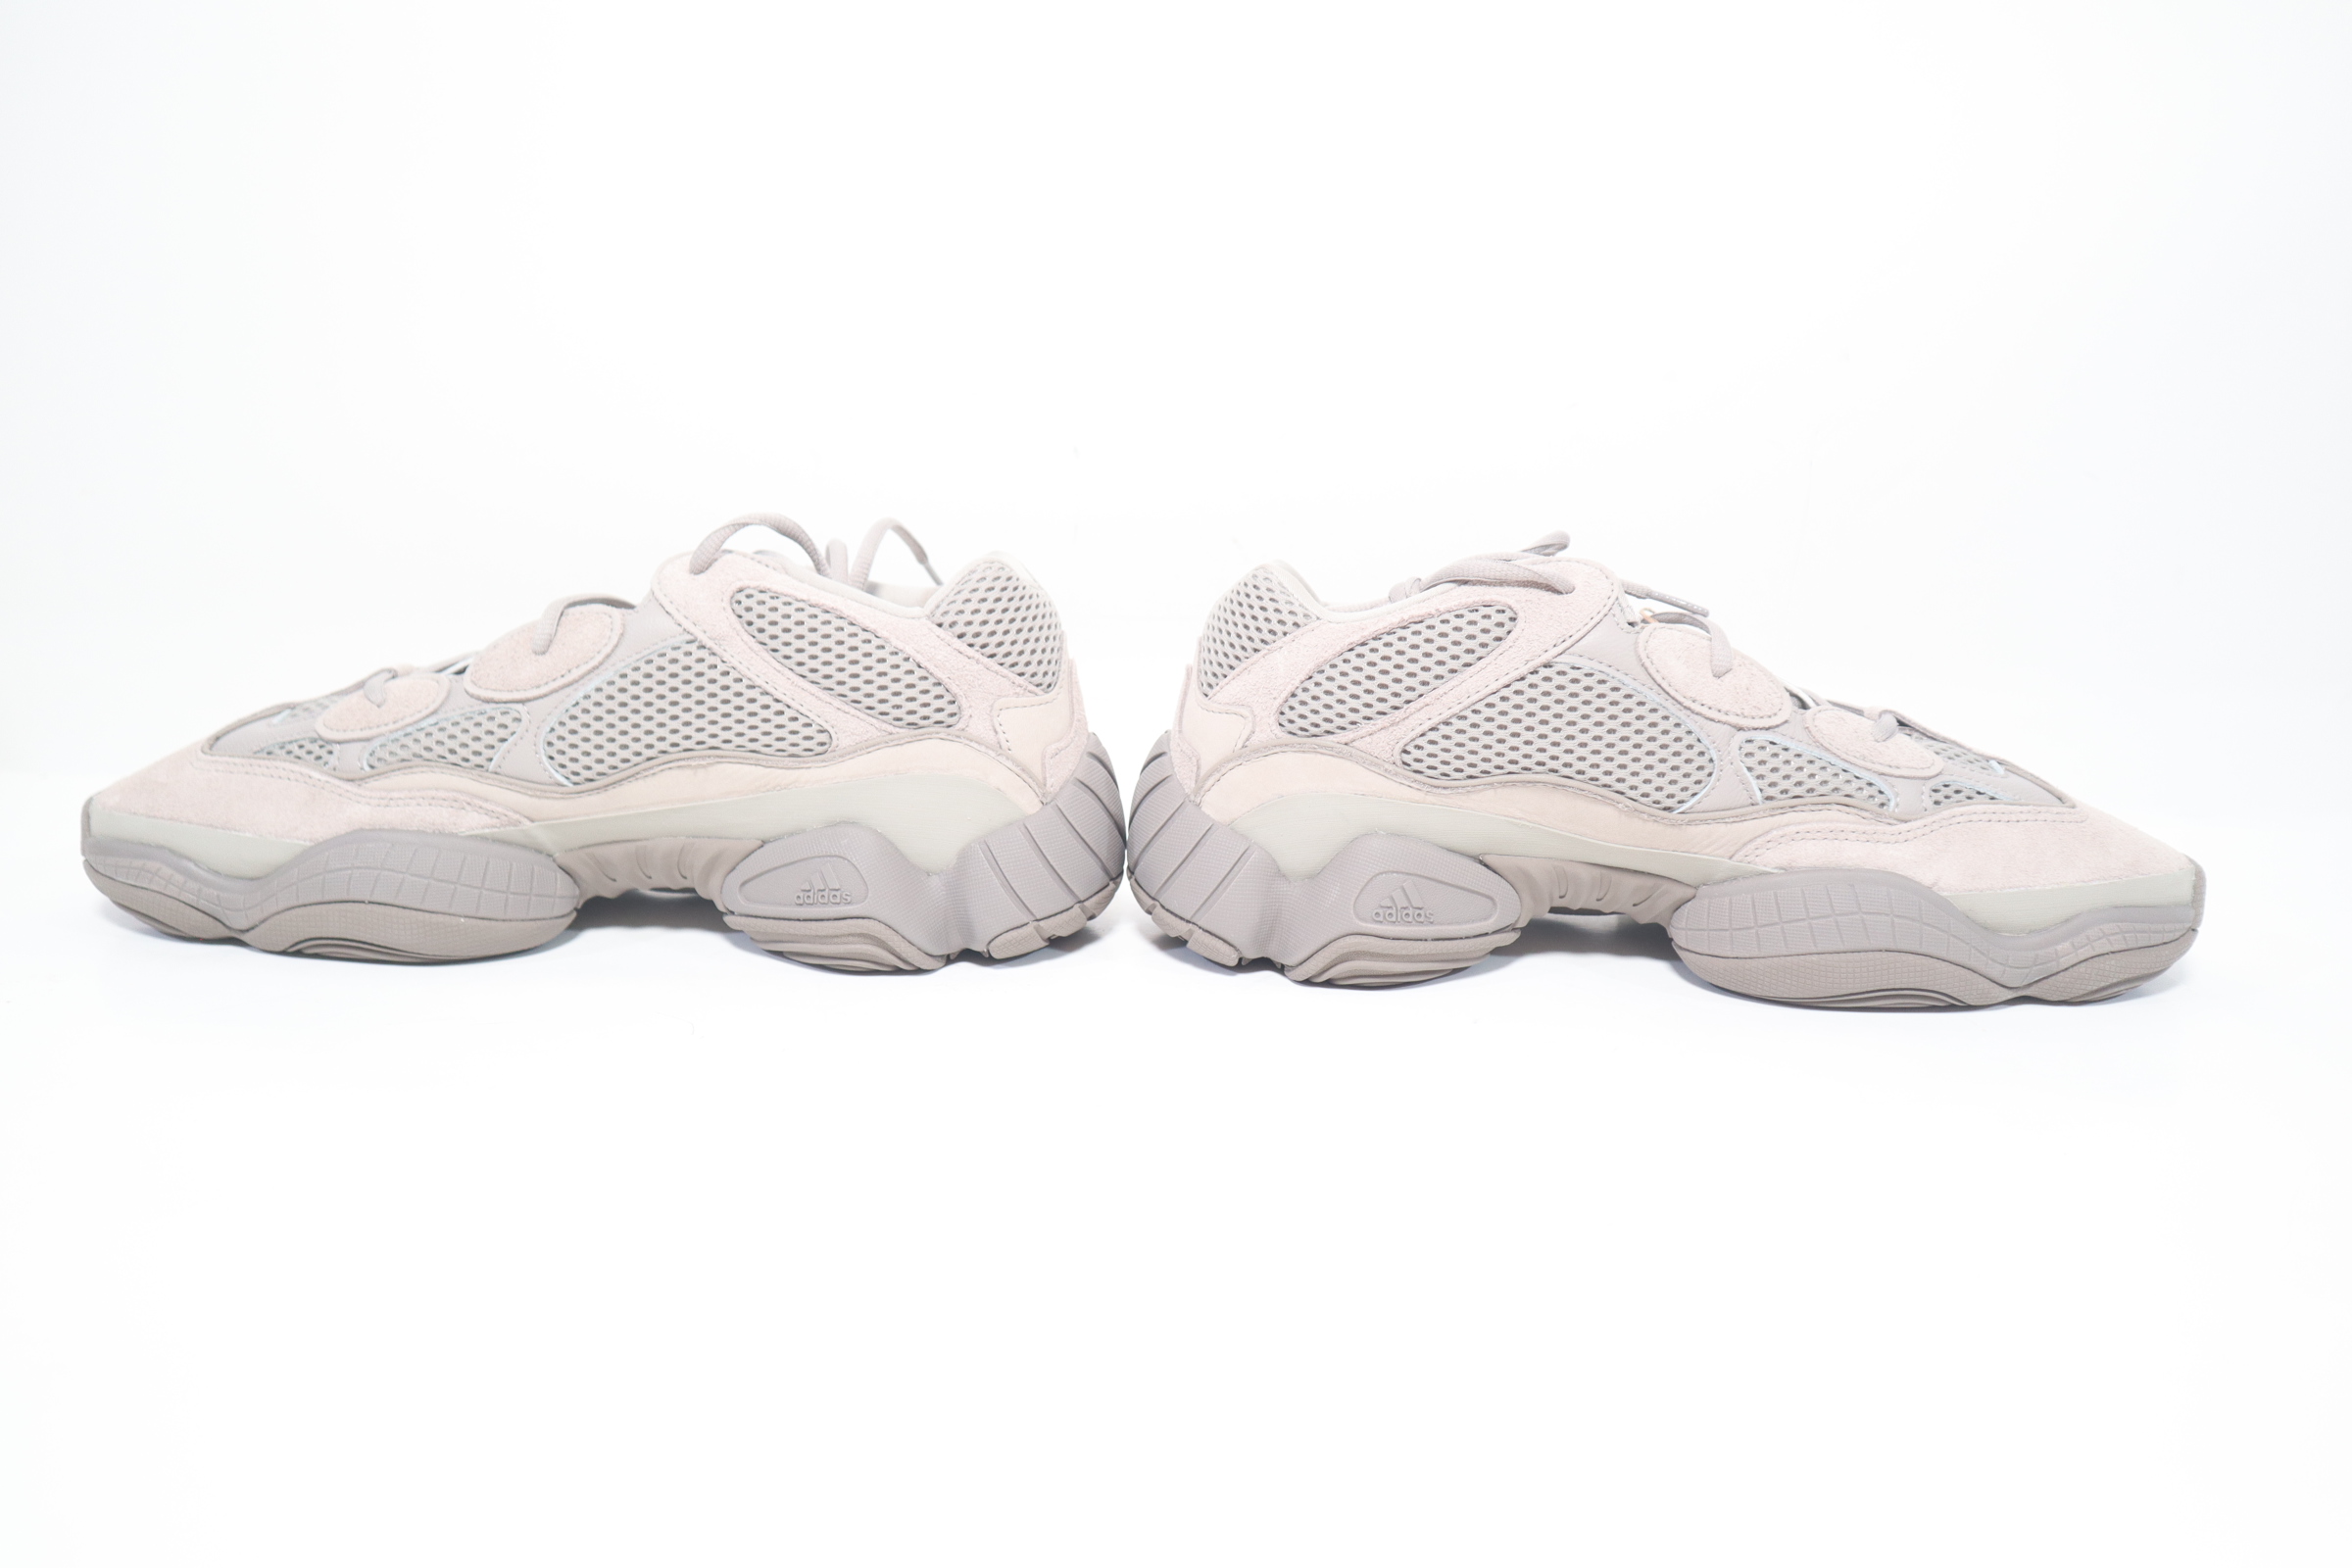 Adidas Yeezy 500 GX3607 Ash Grey Size 13 Laced Men's Sneakers 6031